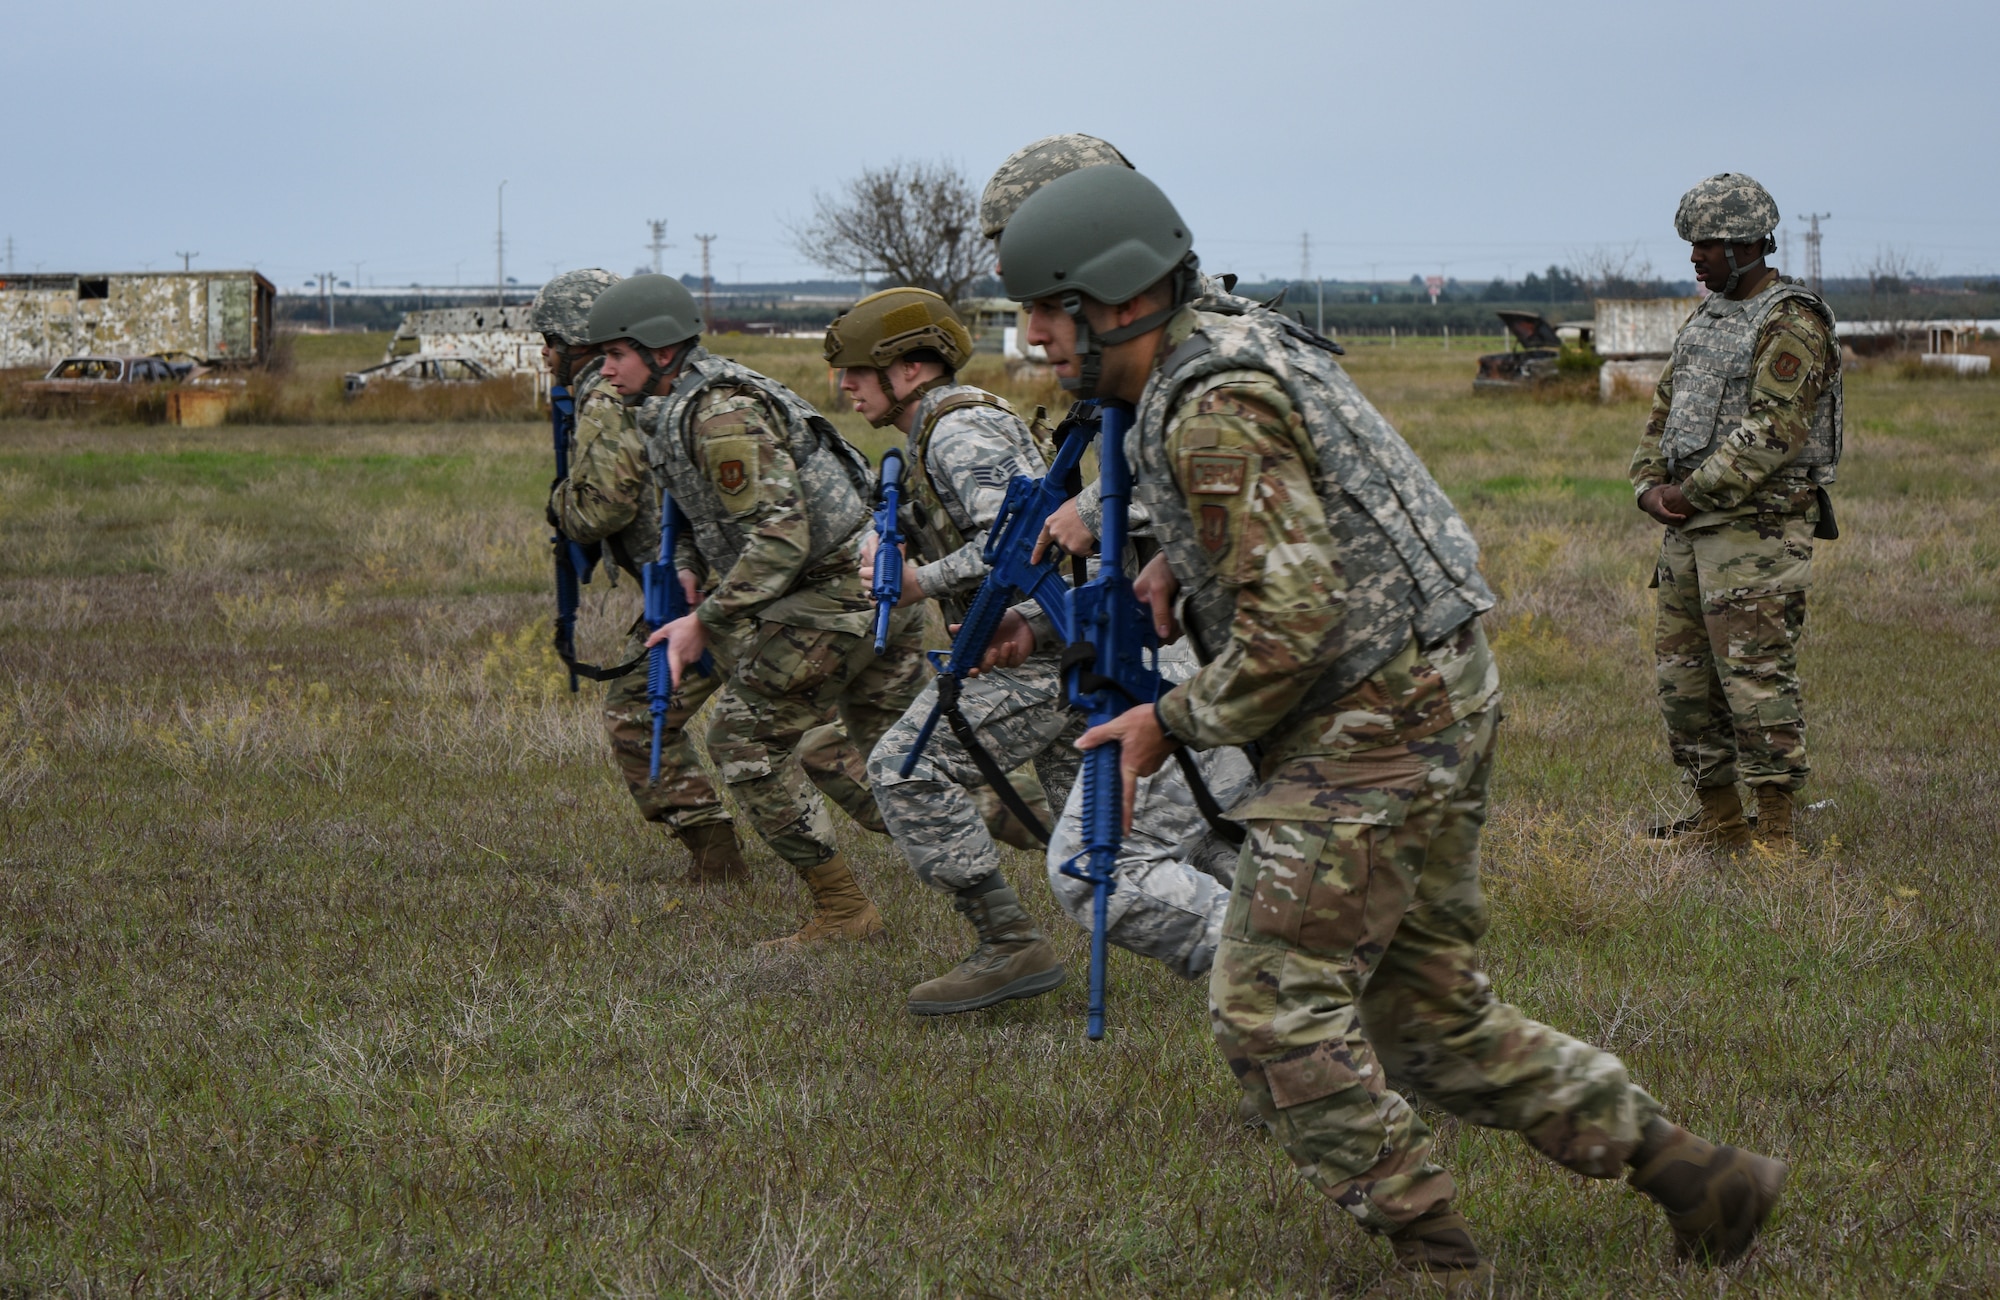 Airmen running with tactical gear in a field